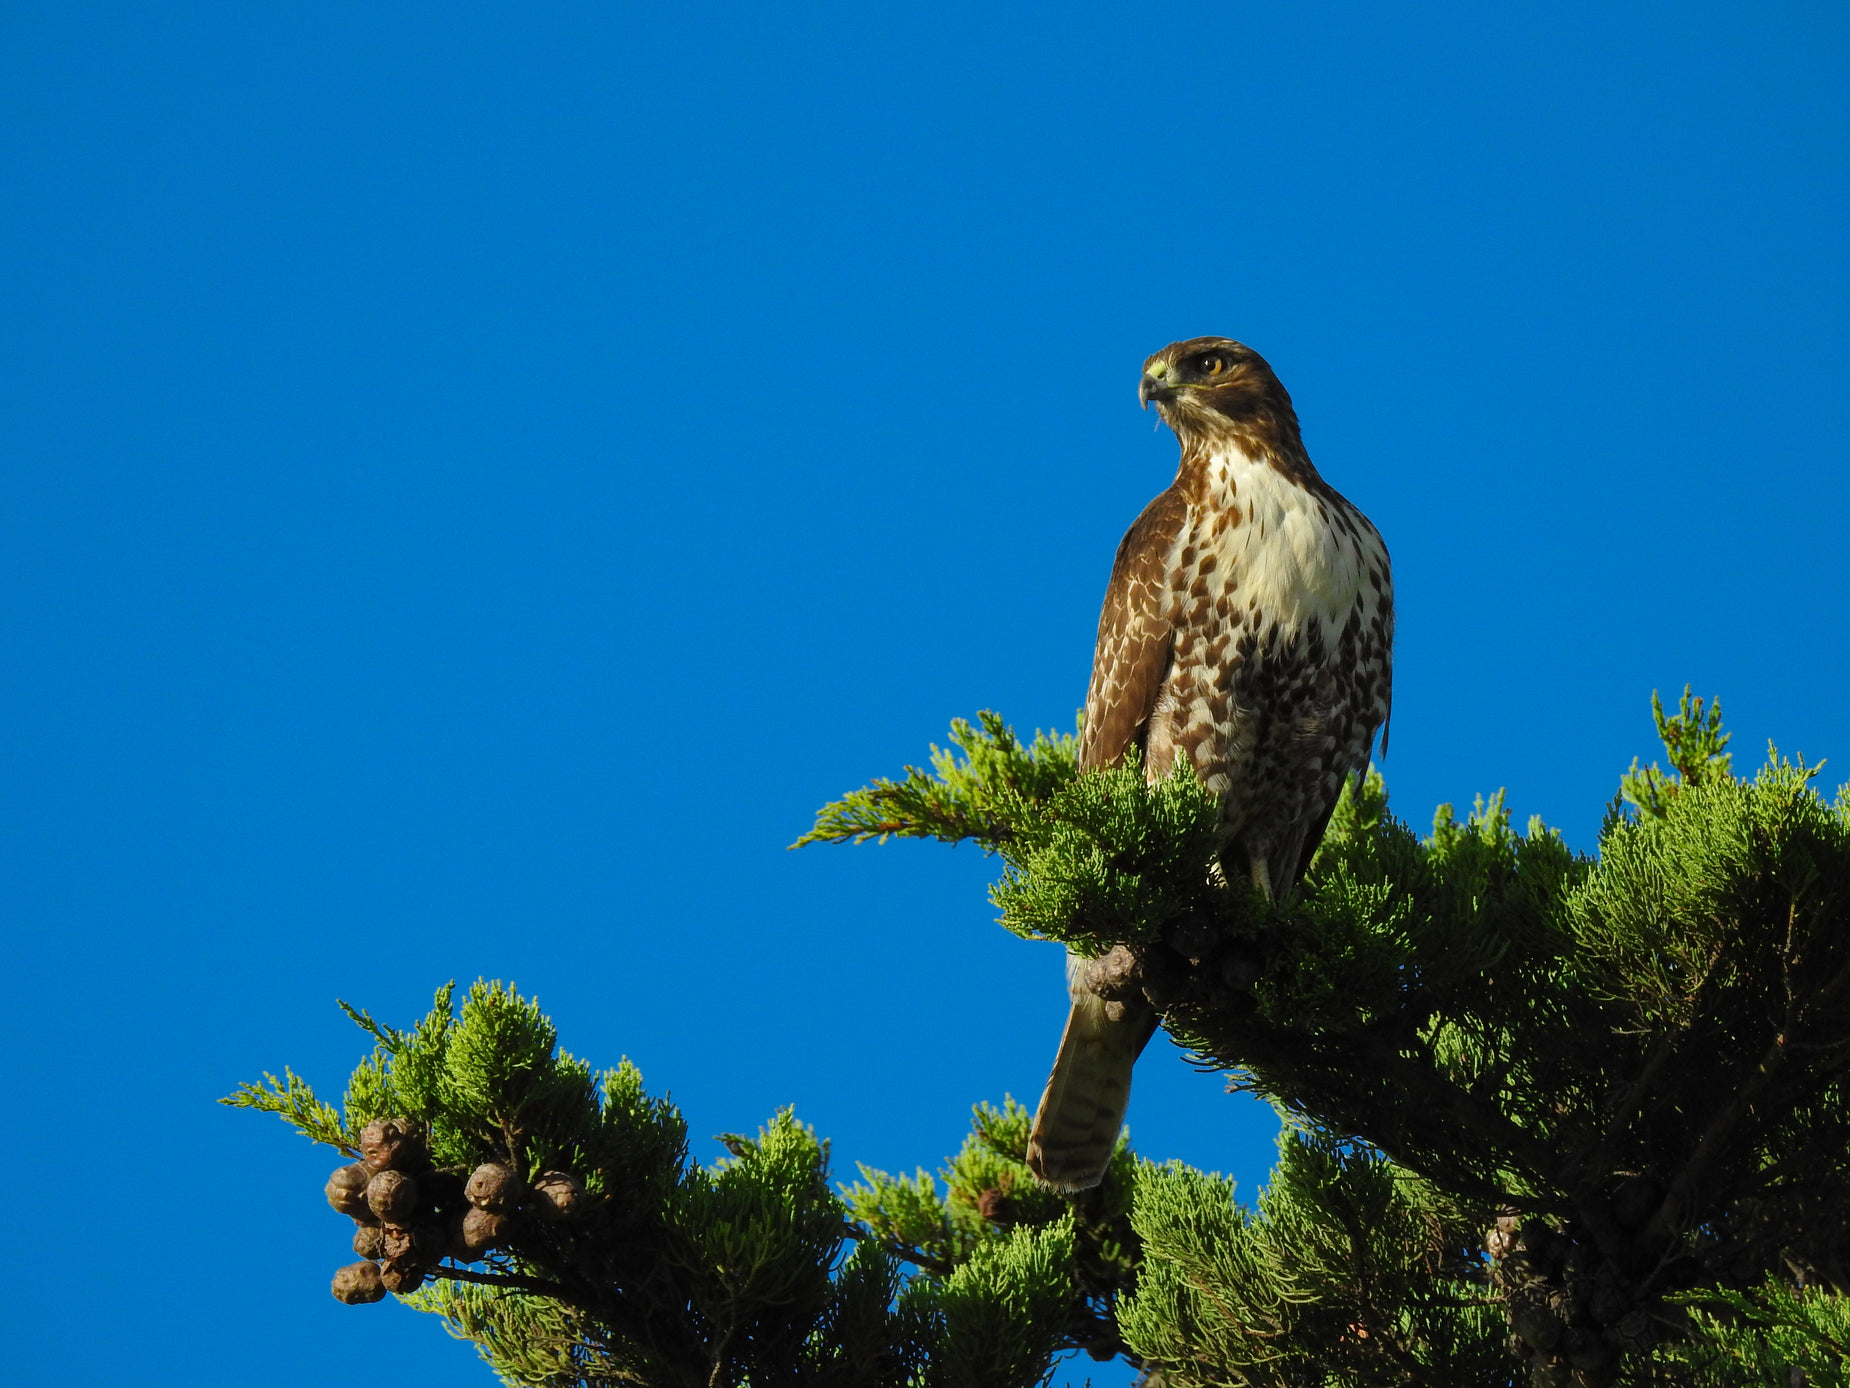 an eagle sitting on the nches of a tree